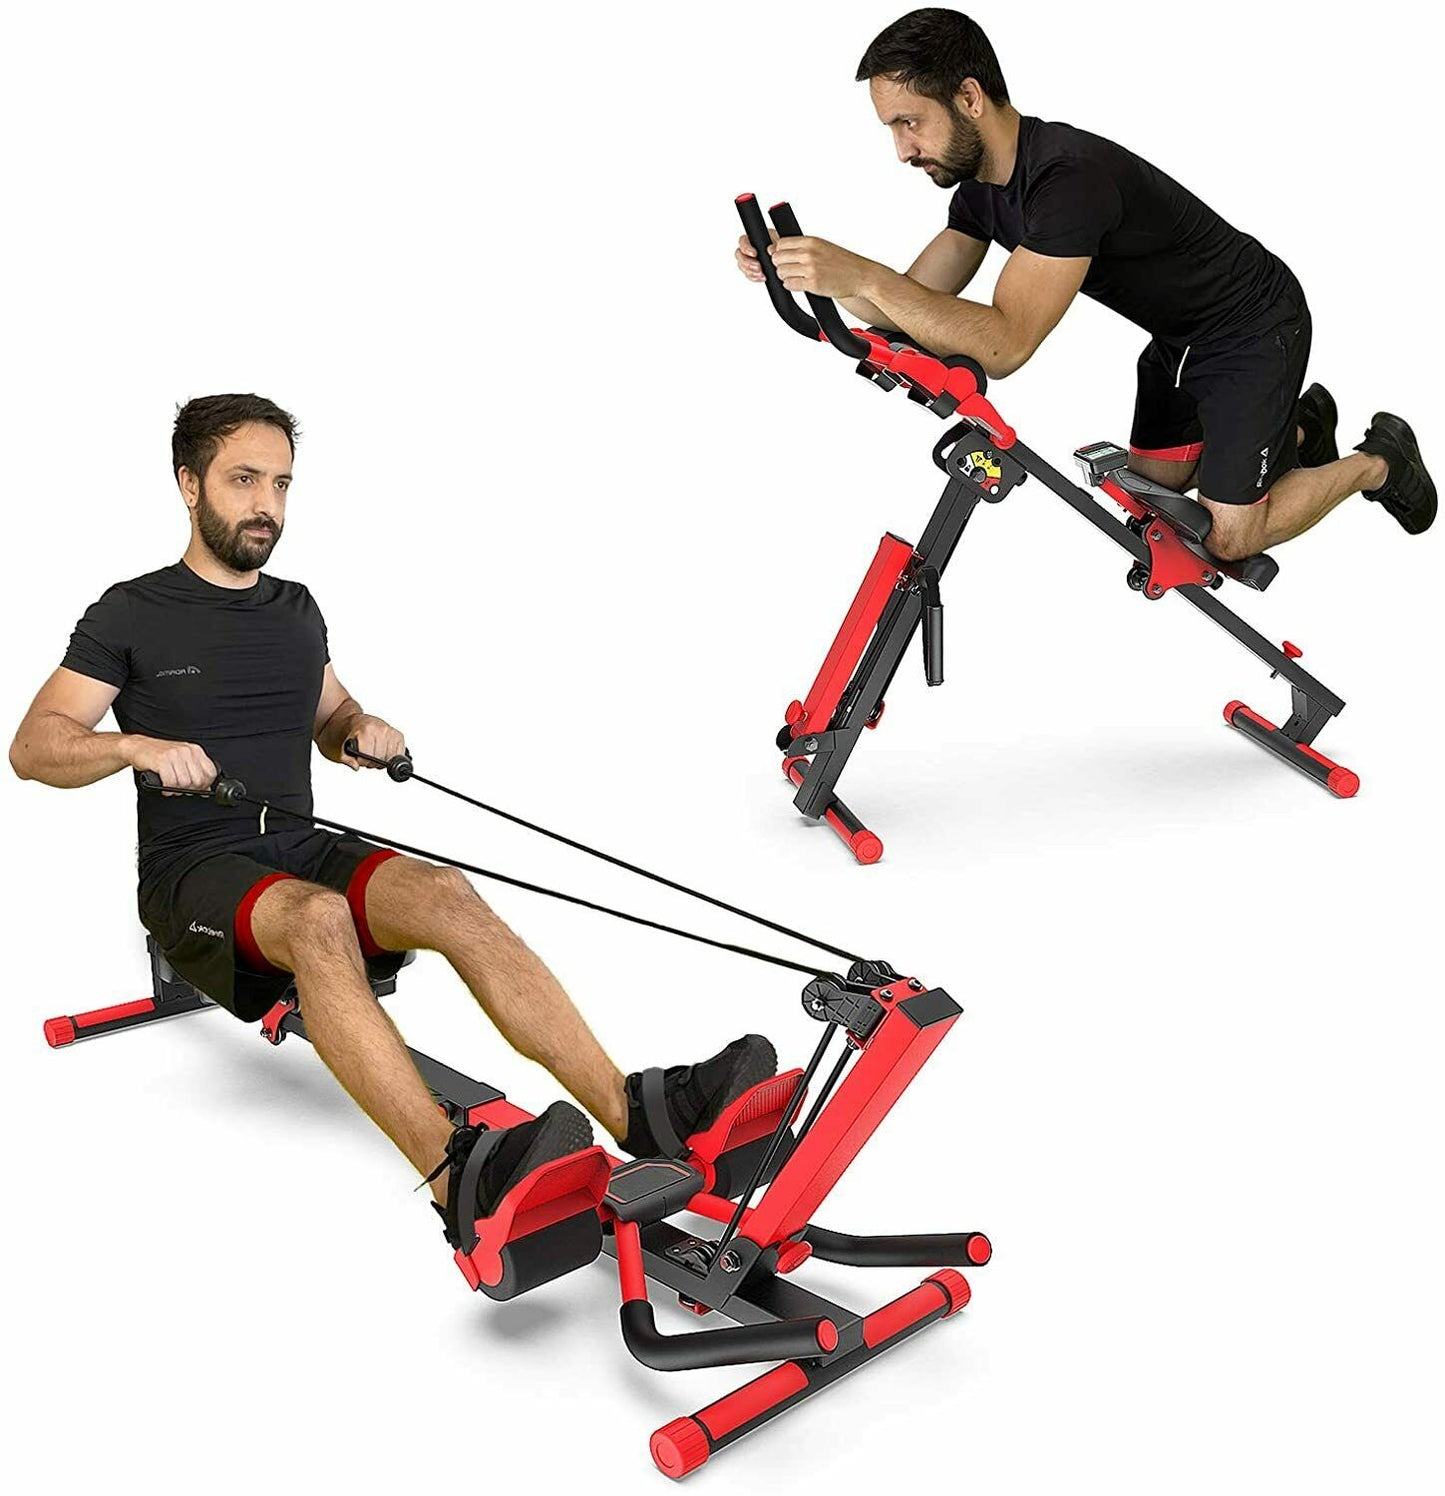 Portable Seated Home Rowing Back Exercise Machine